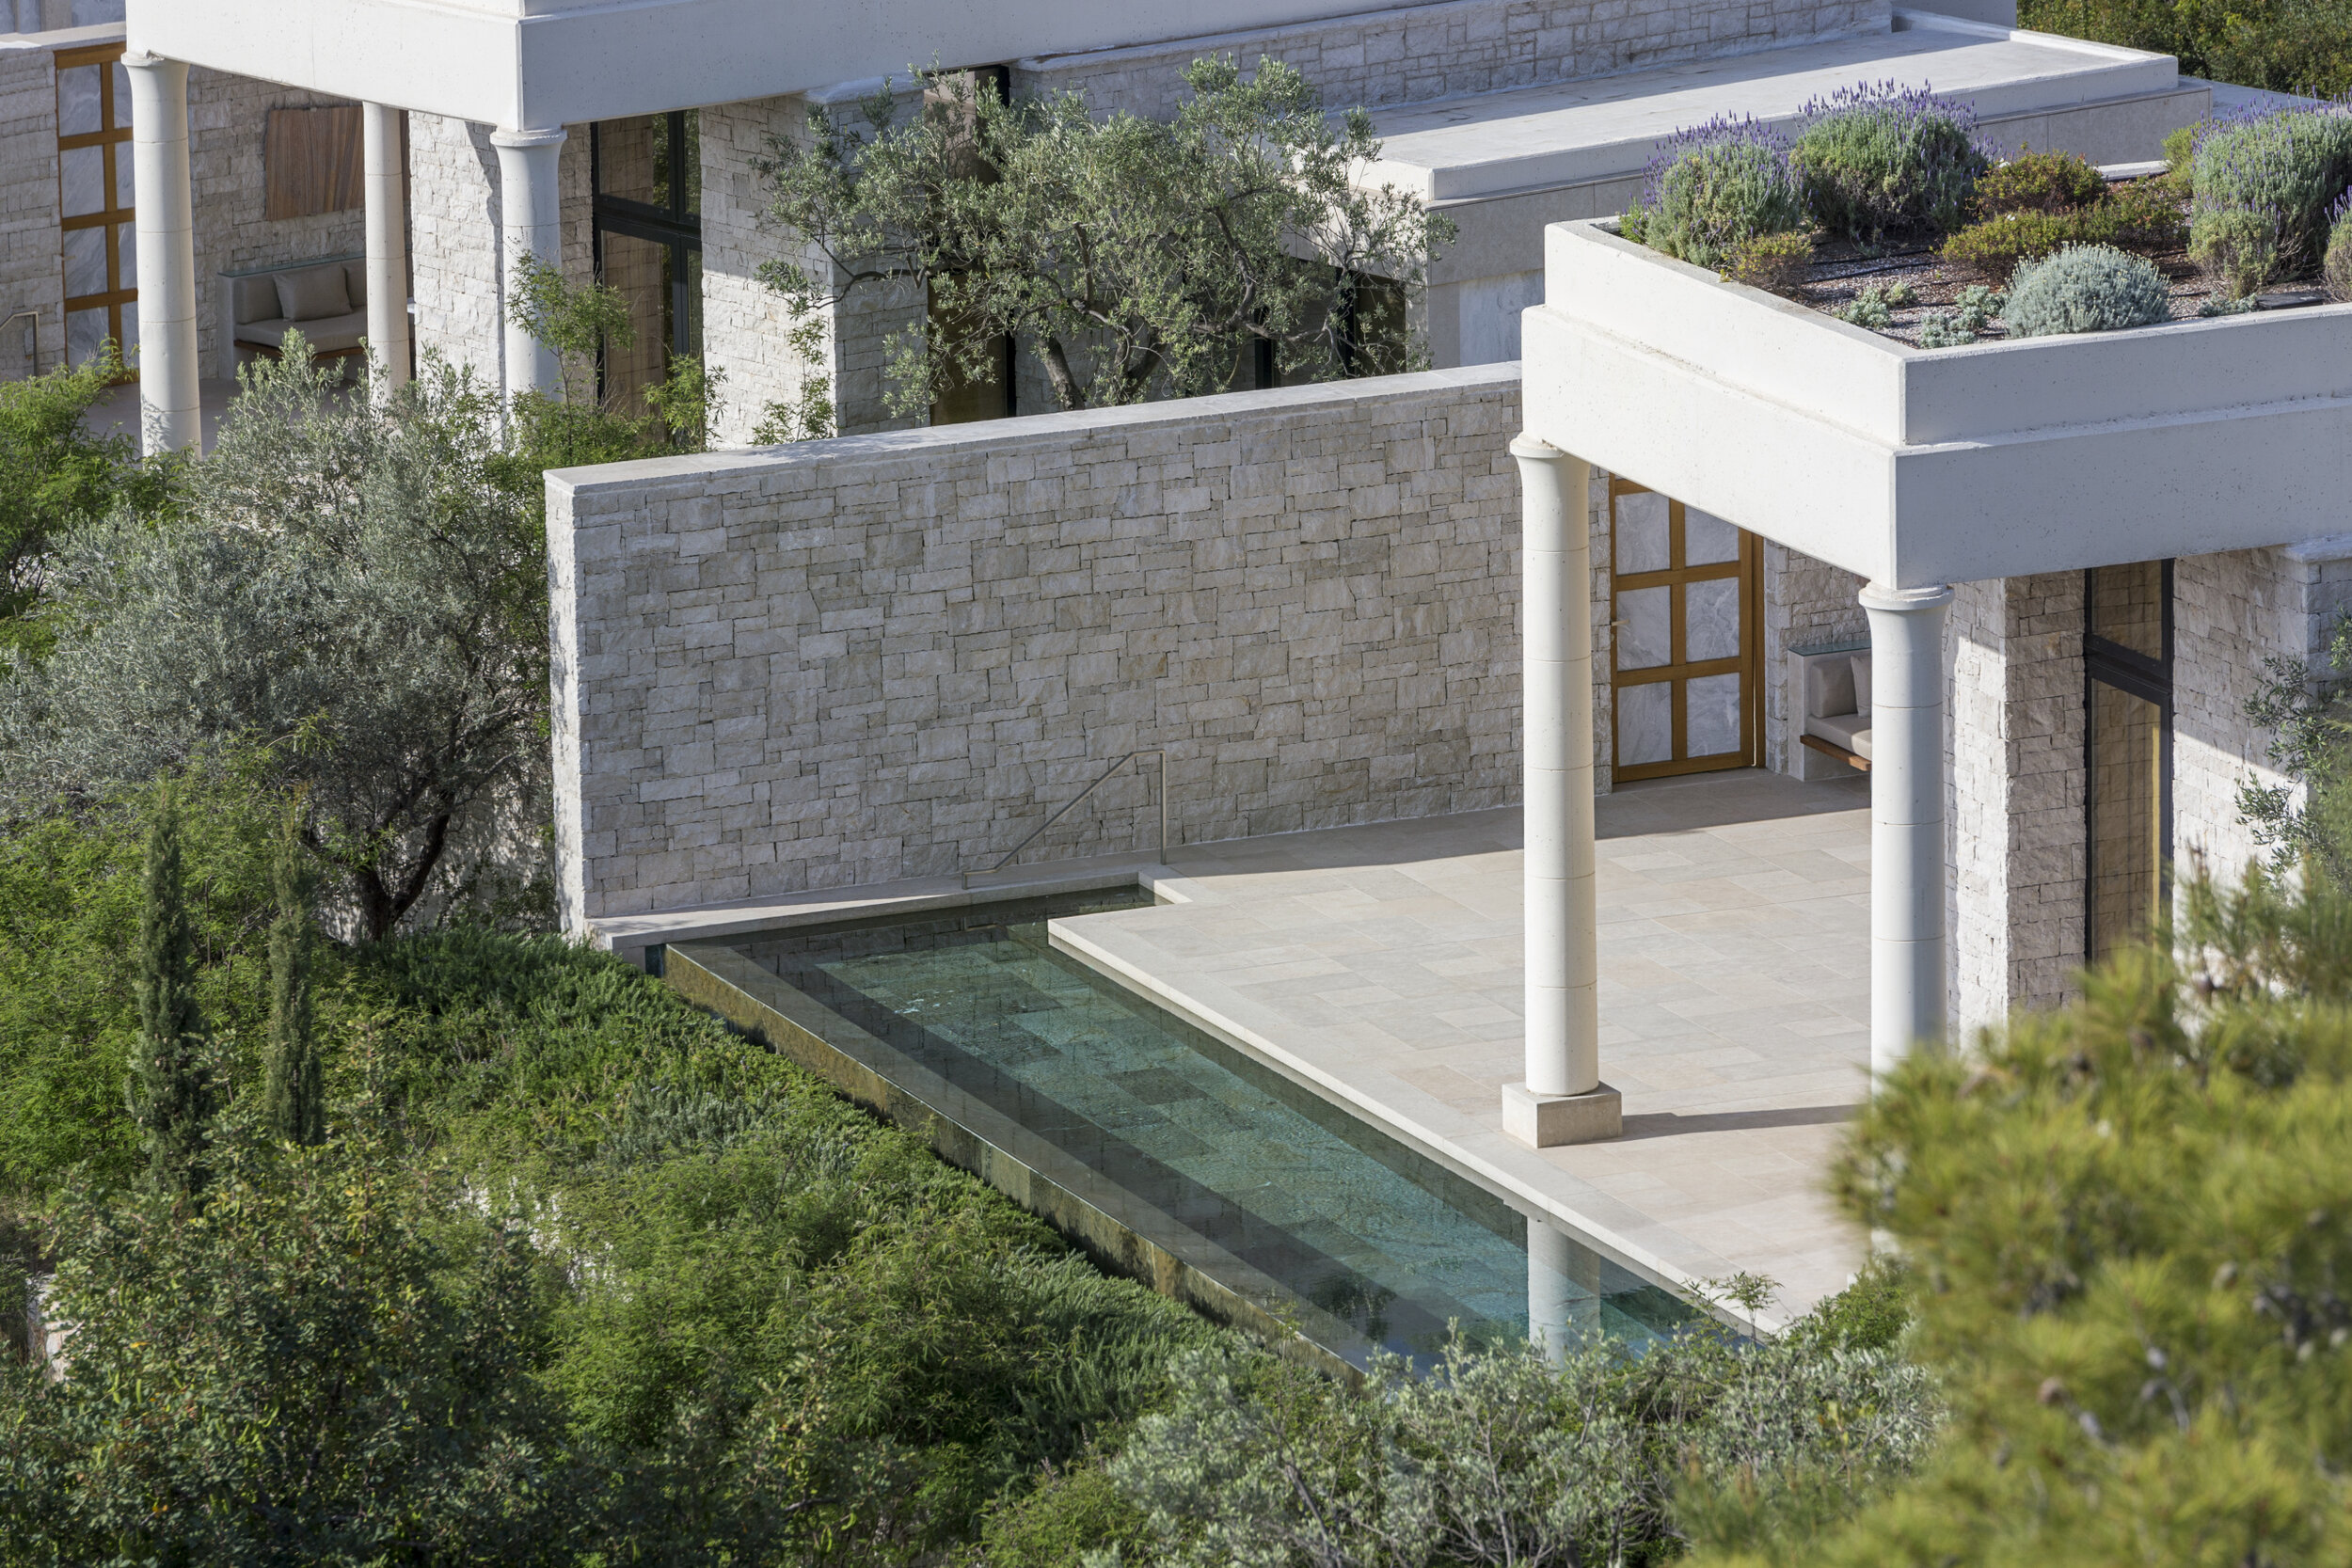 Amanzoe, Greece - Accommodation, Deluxe pool pavilion, Pool_High Res_7837.jpg